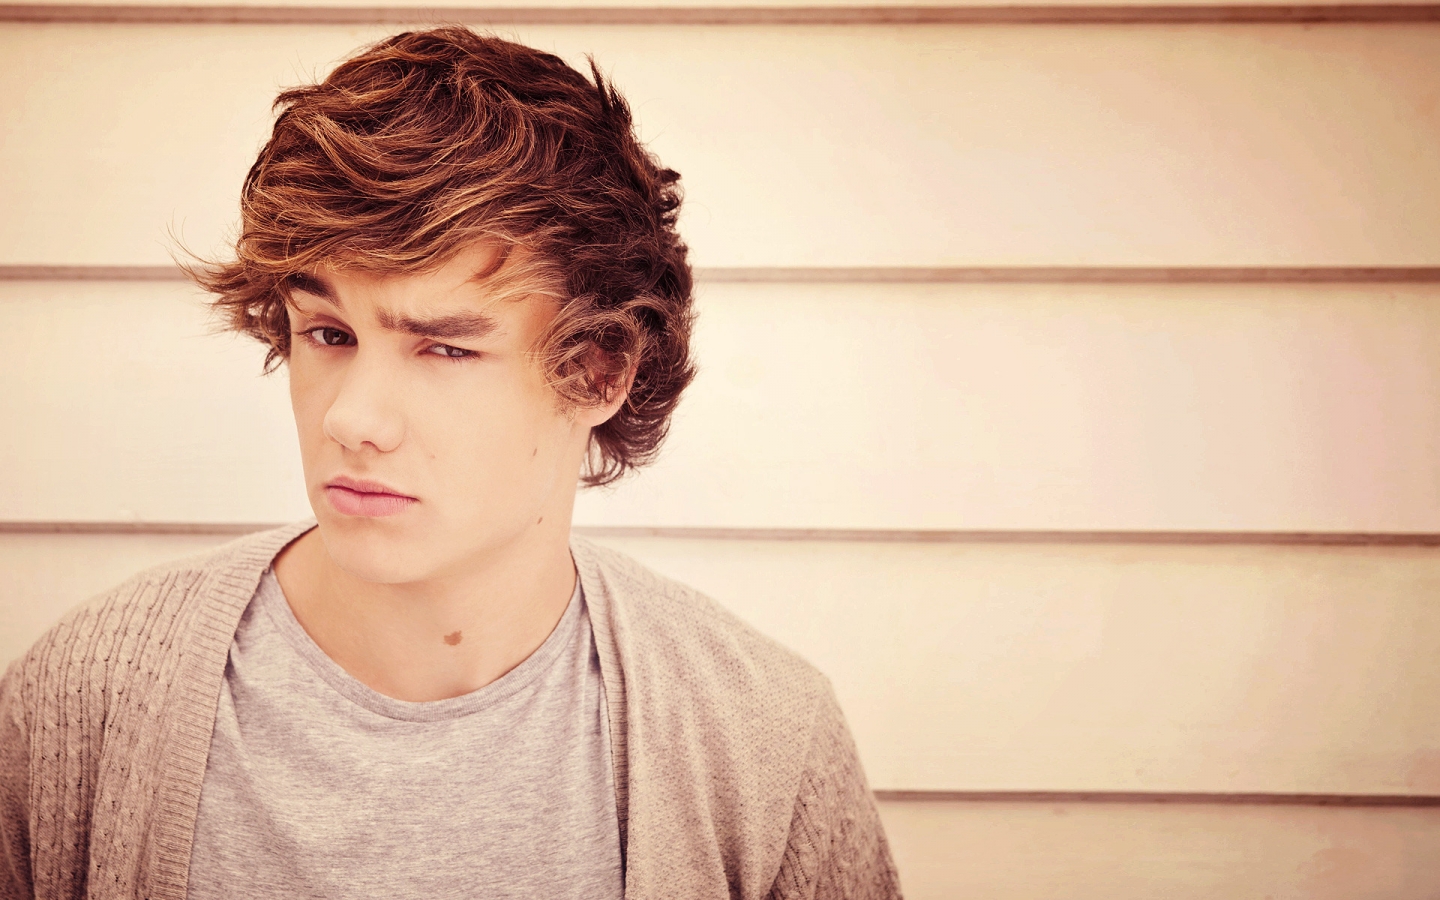 Liam Payne Look for 1440 x 900 widescreen resolution